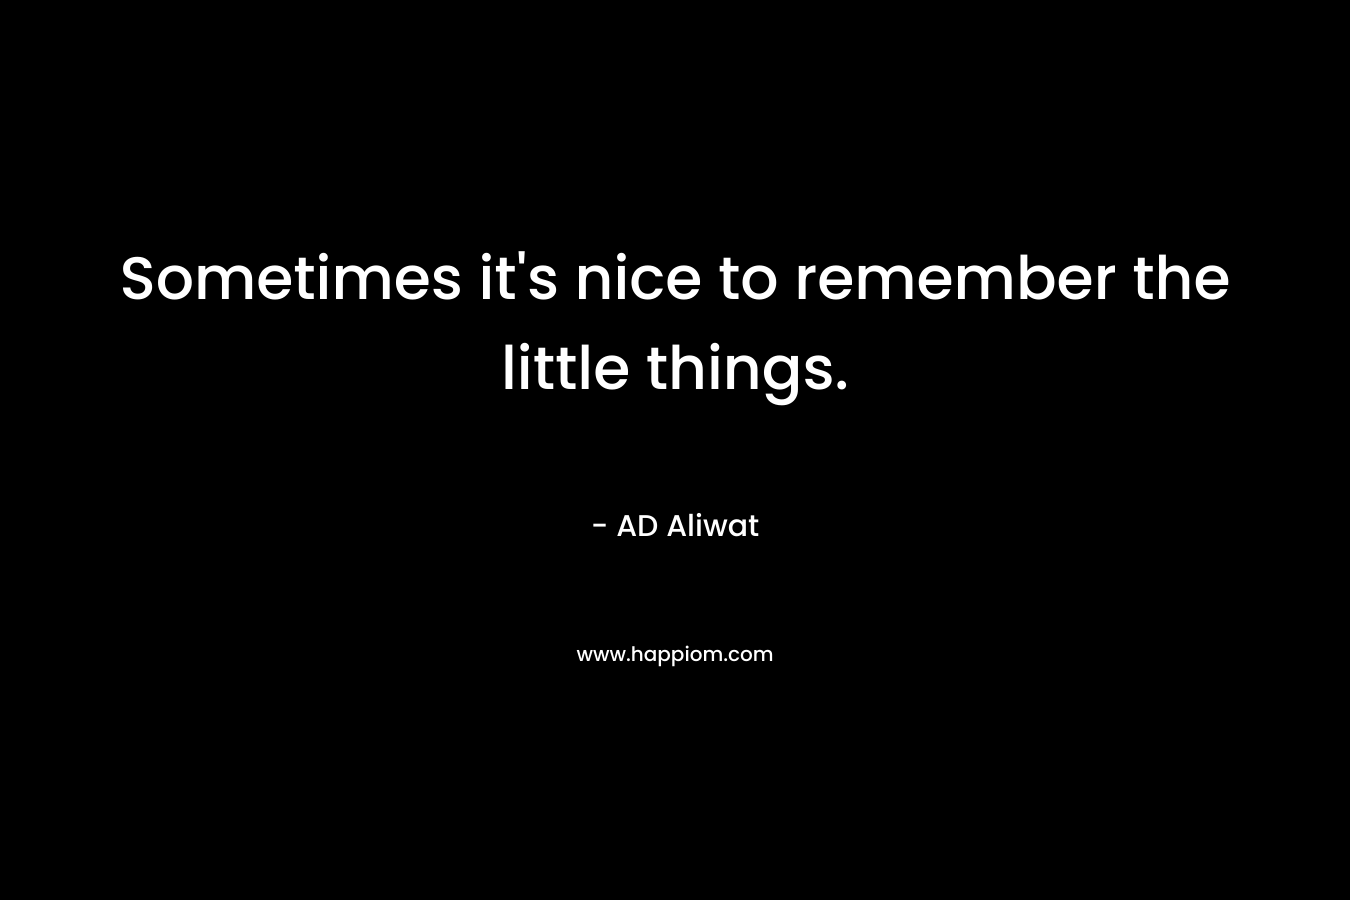 Sometimes it's nice to remember the little things.